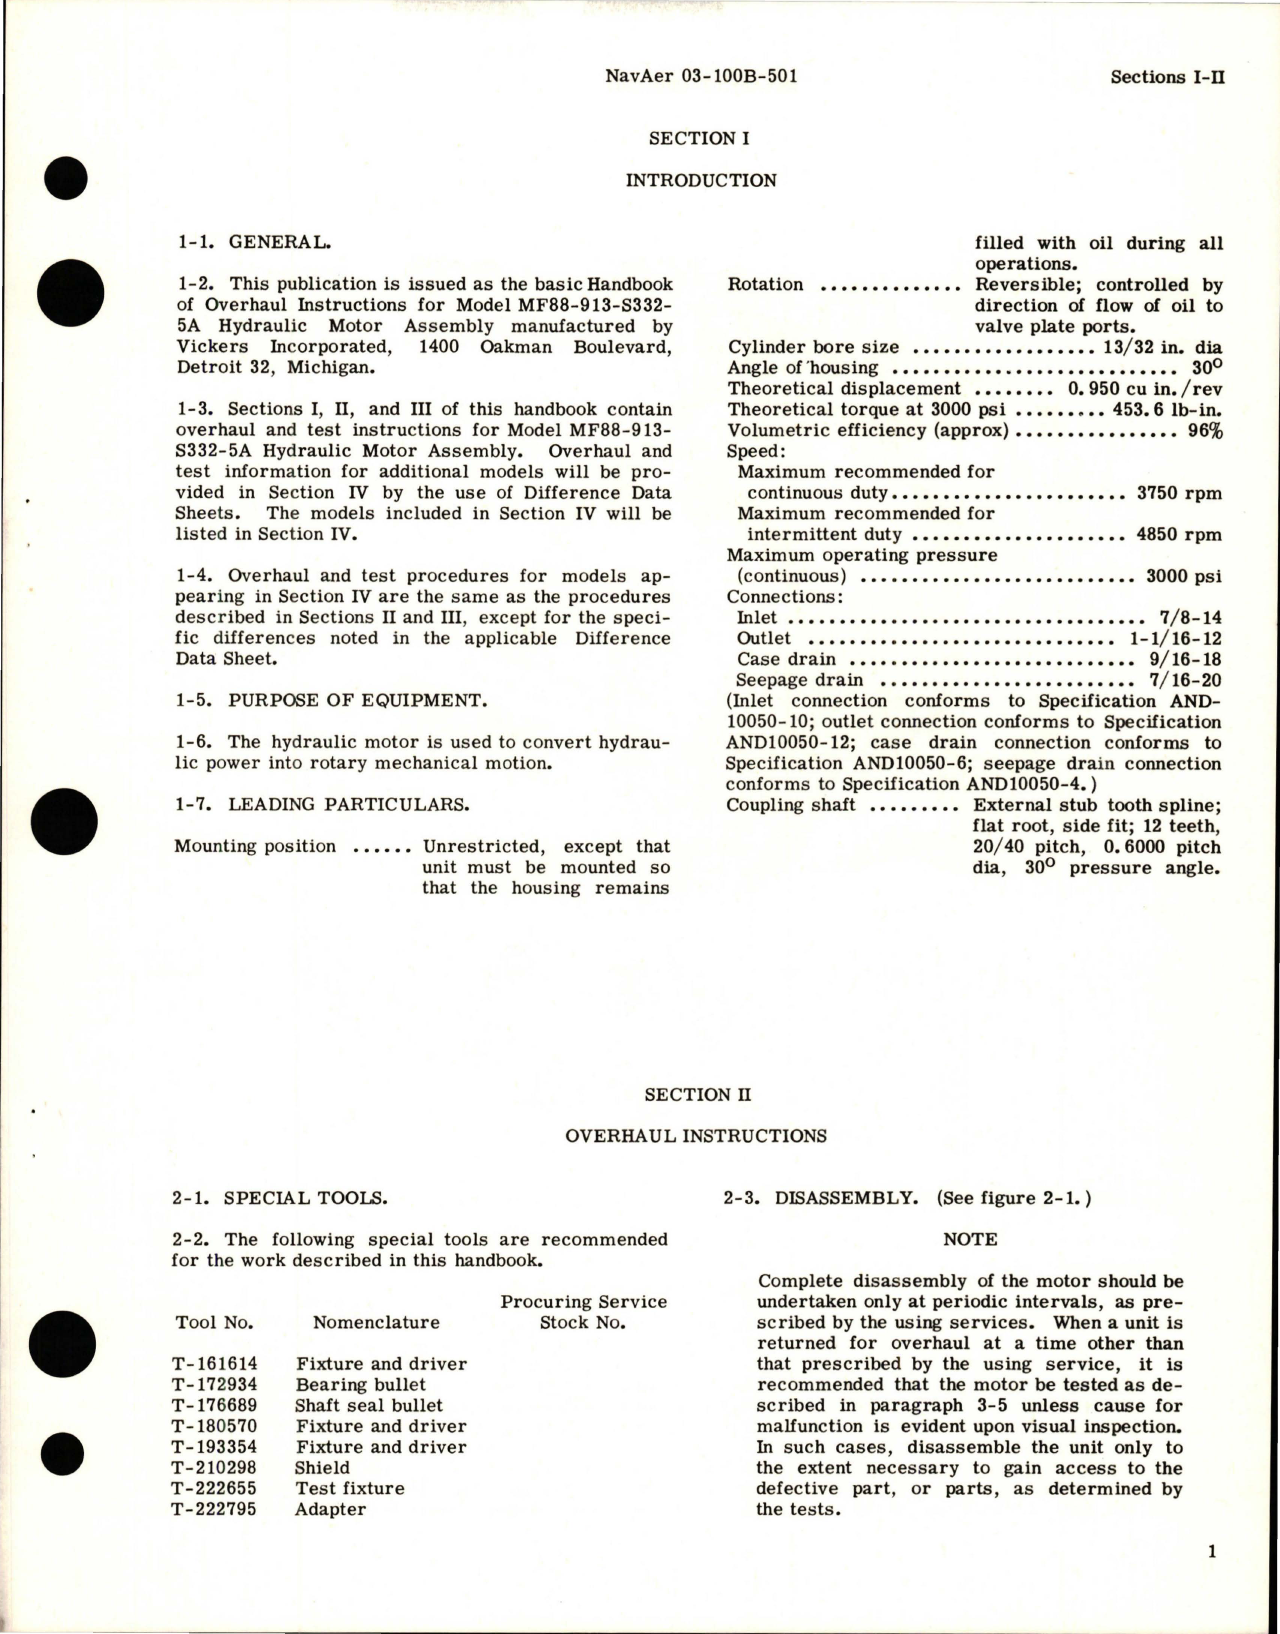 Sample page 5 from AirCorps Library document: Overhaul Instructions for Constant Displacement Hydraulic Motor Assembly - Model MF88-913-S332-5A 